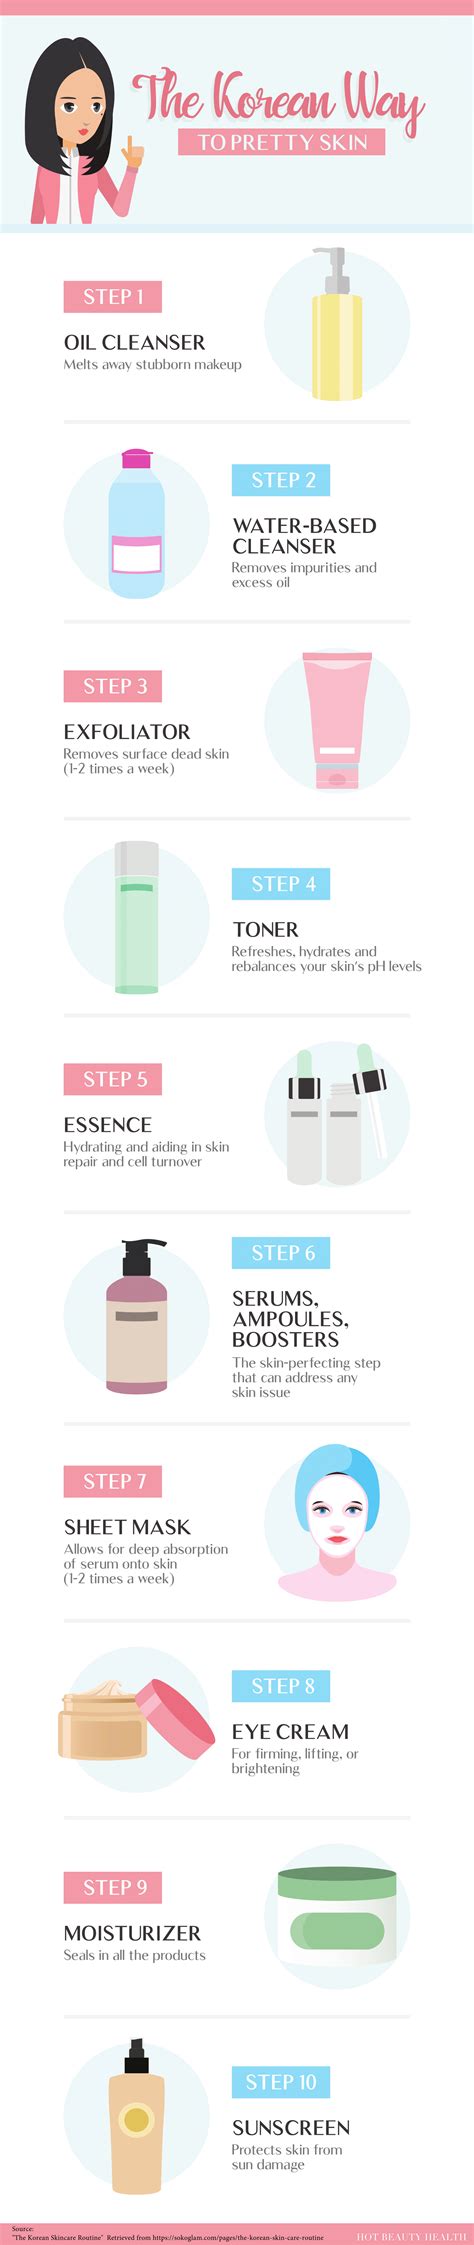 the 10 step korean skincare routine [infographic] hot beauty health